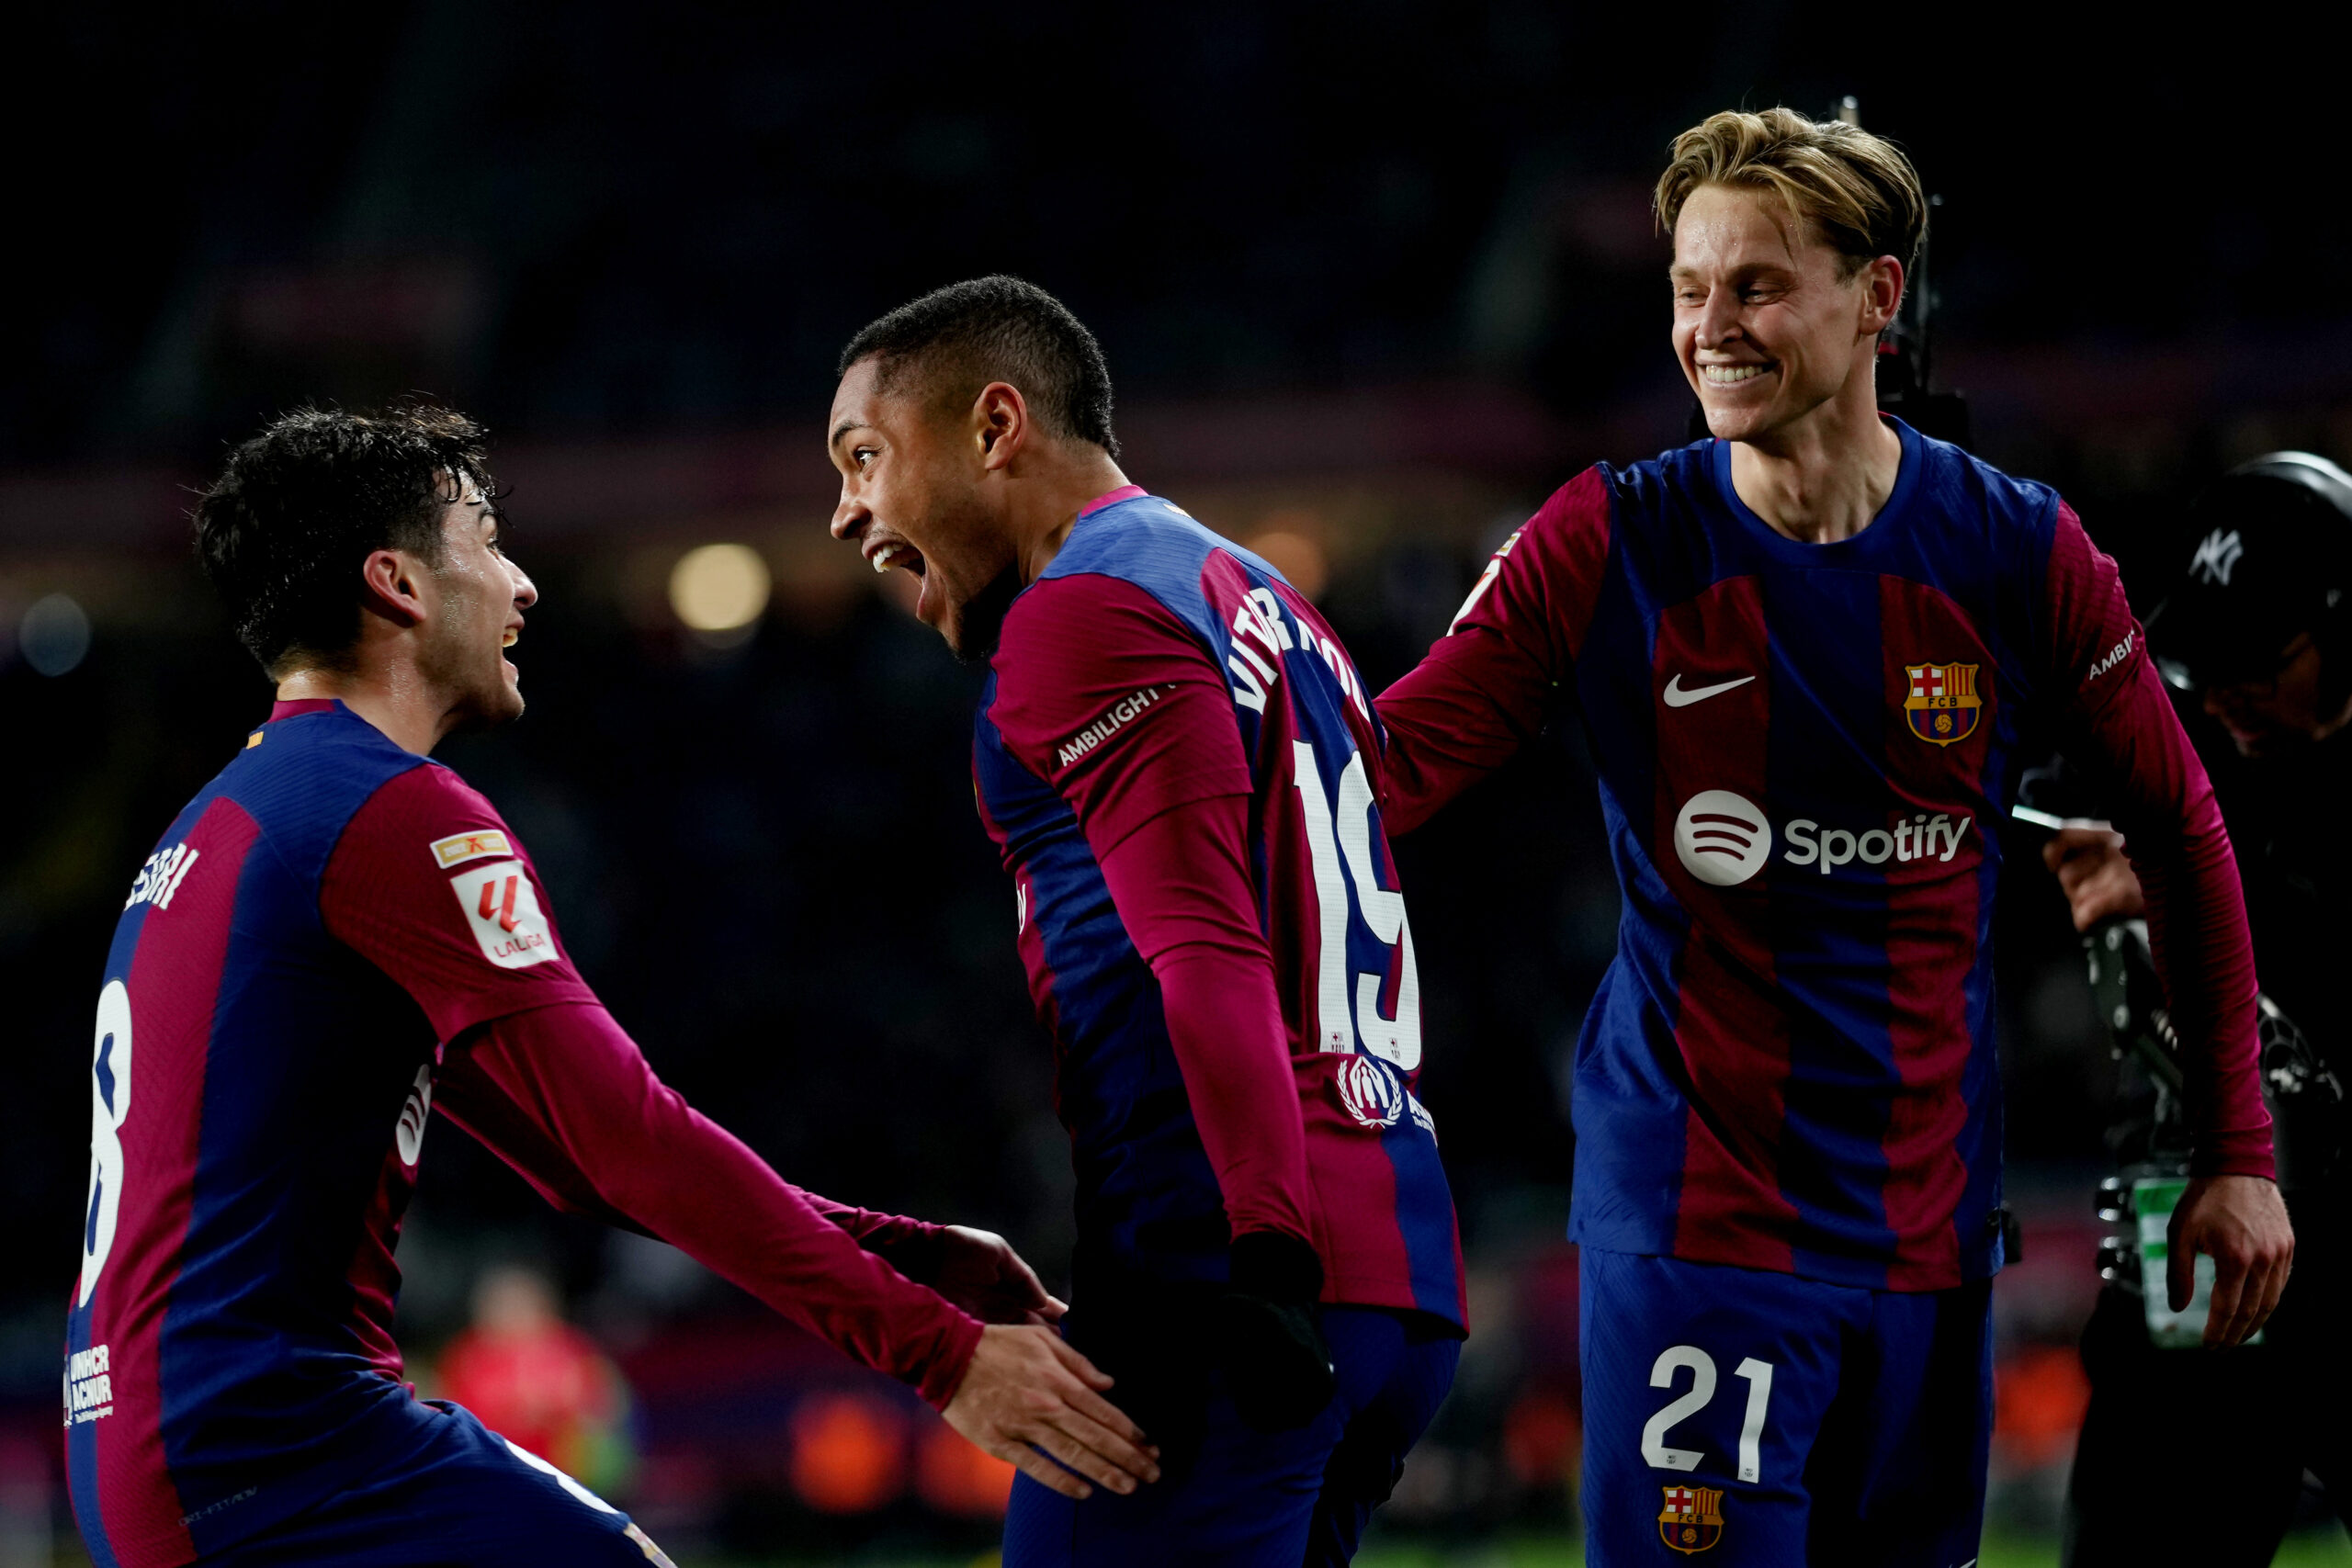 BARCELONA, SPAIN - JANUARY 31: Vitor Roque of FC Barcelona celebrates scoring his team's first goal with teammates Joao Cancelo and Frenkie de Jong during the LaLiga EA Sports match between FC Barcelona and CA Osasuna at Estadi Olimpic Lluis Companys on January 31, 2024 in Barcelona, Spain.